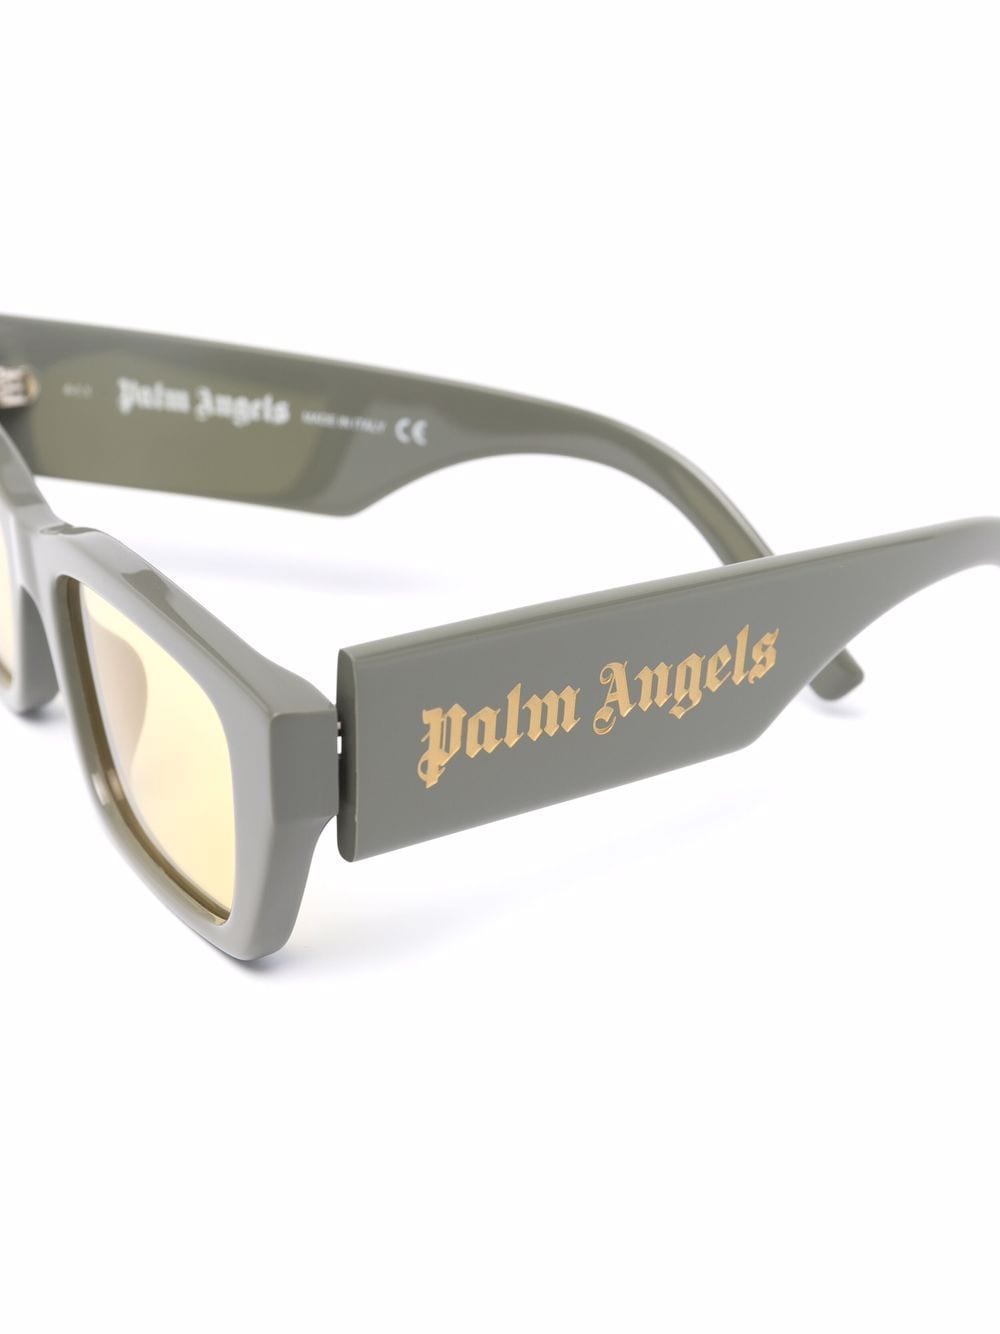 Palm Angels, Accessories, New Palm Angels Sunglasses Peri28 007 Authentic